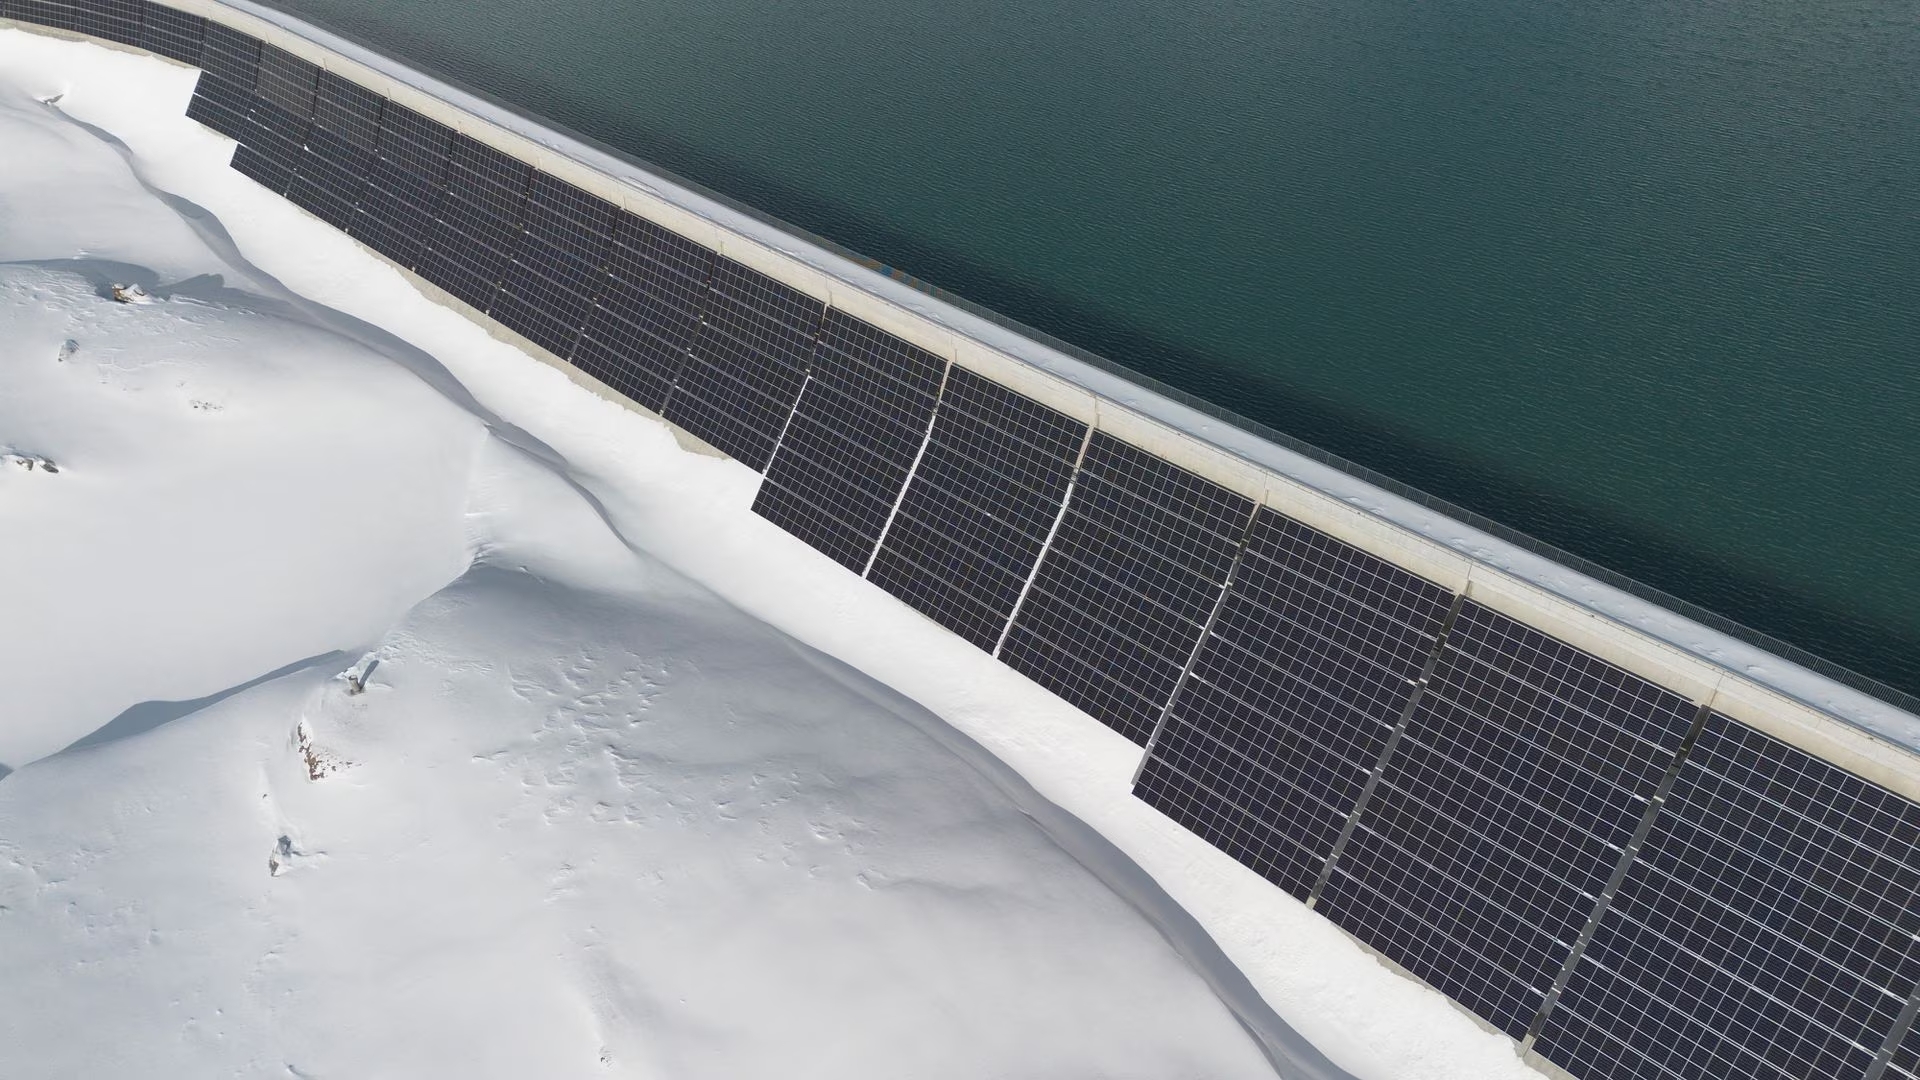 The highest rowing in Europe is covered with 5 thousand solar panels - they will produce almost 3.3 million kWh of electricity per year